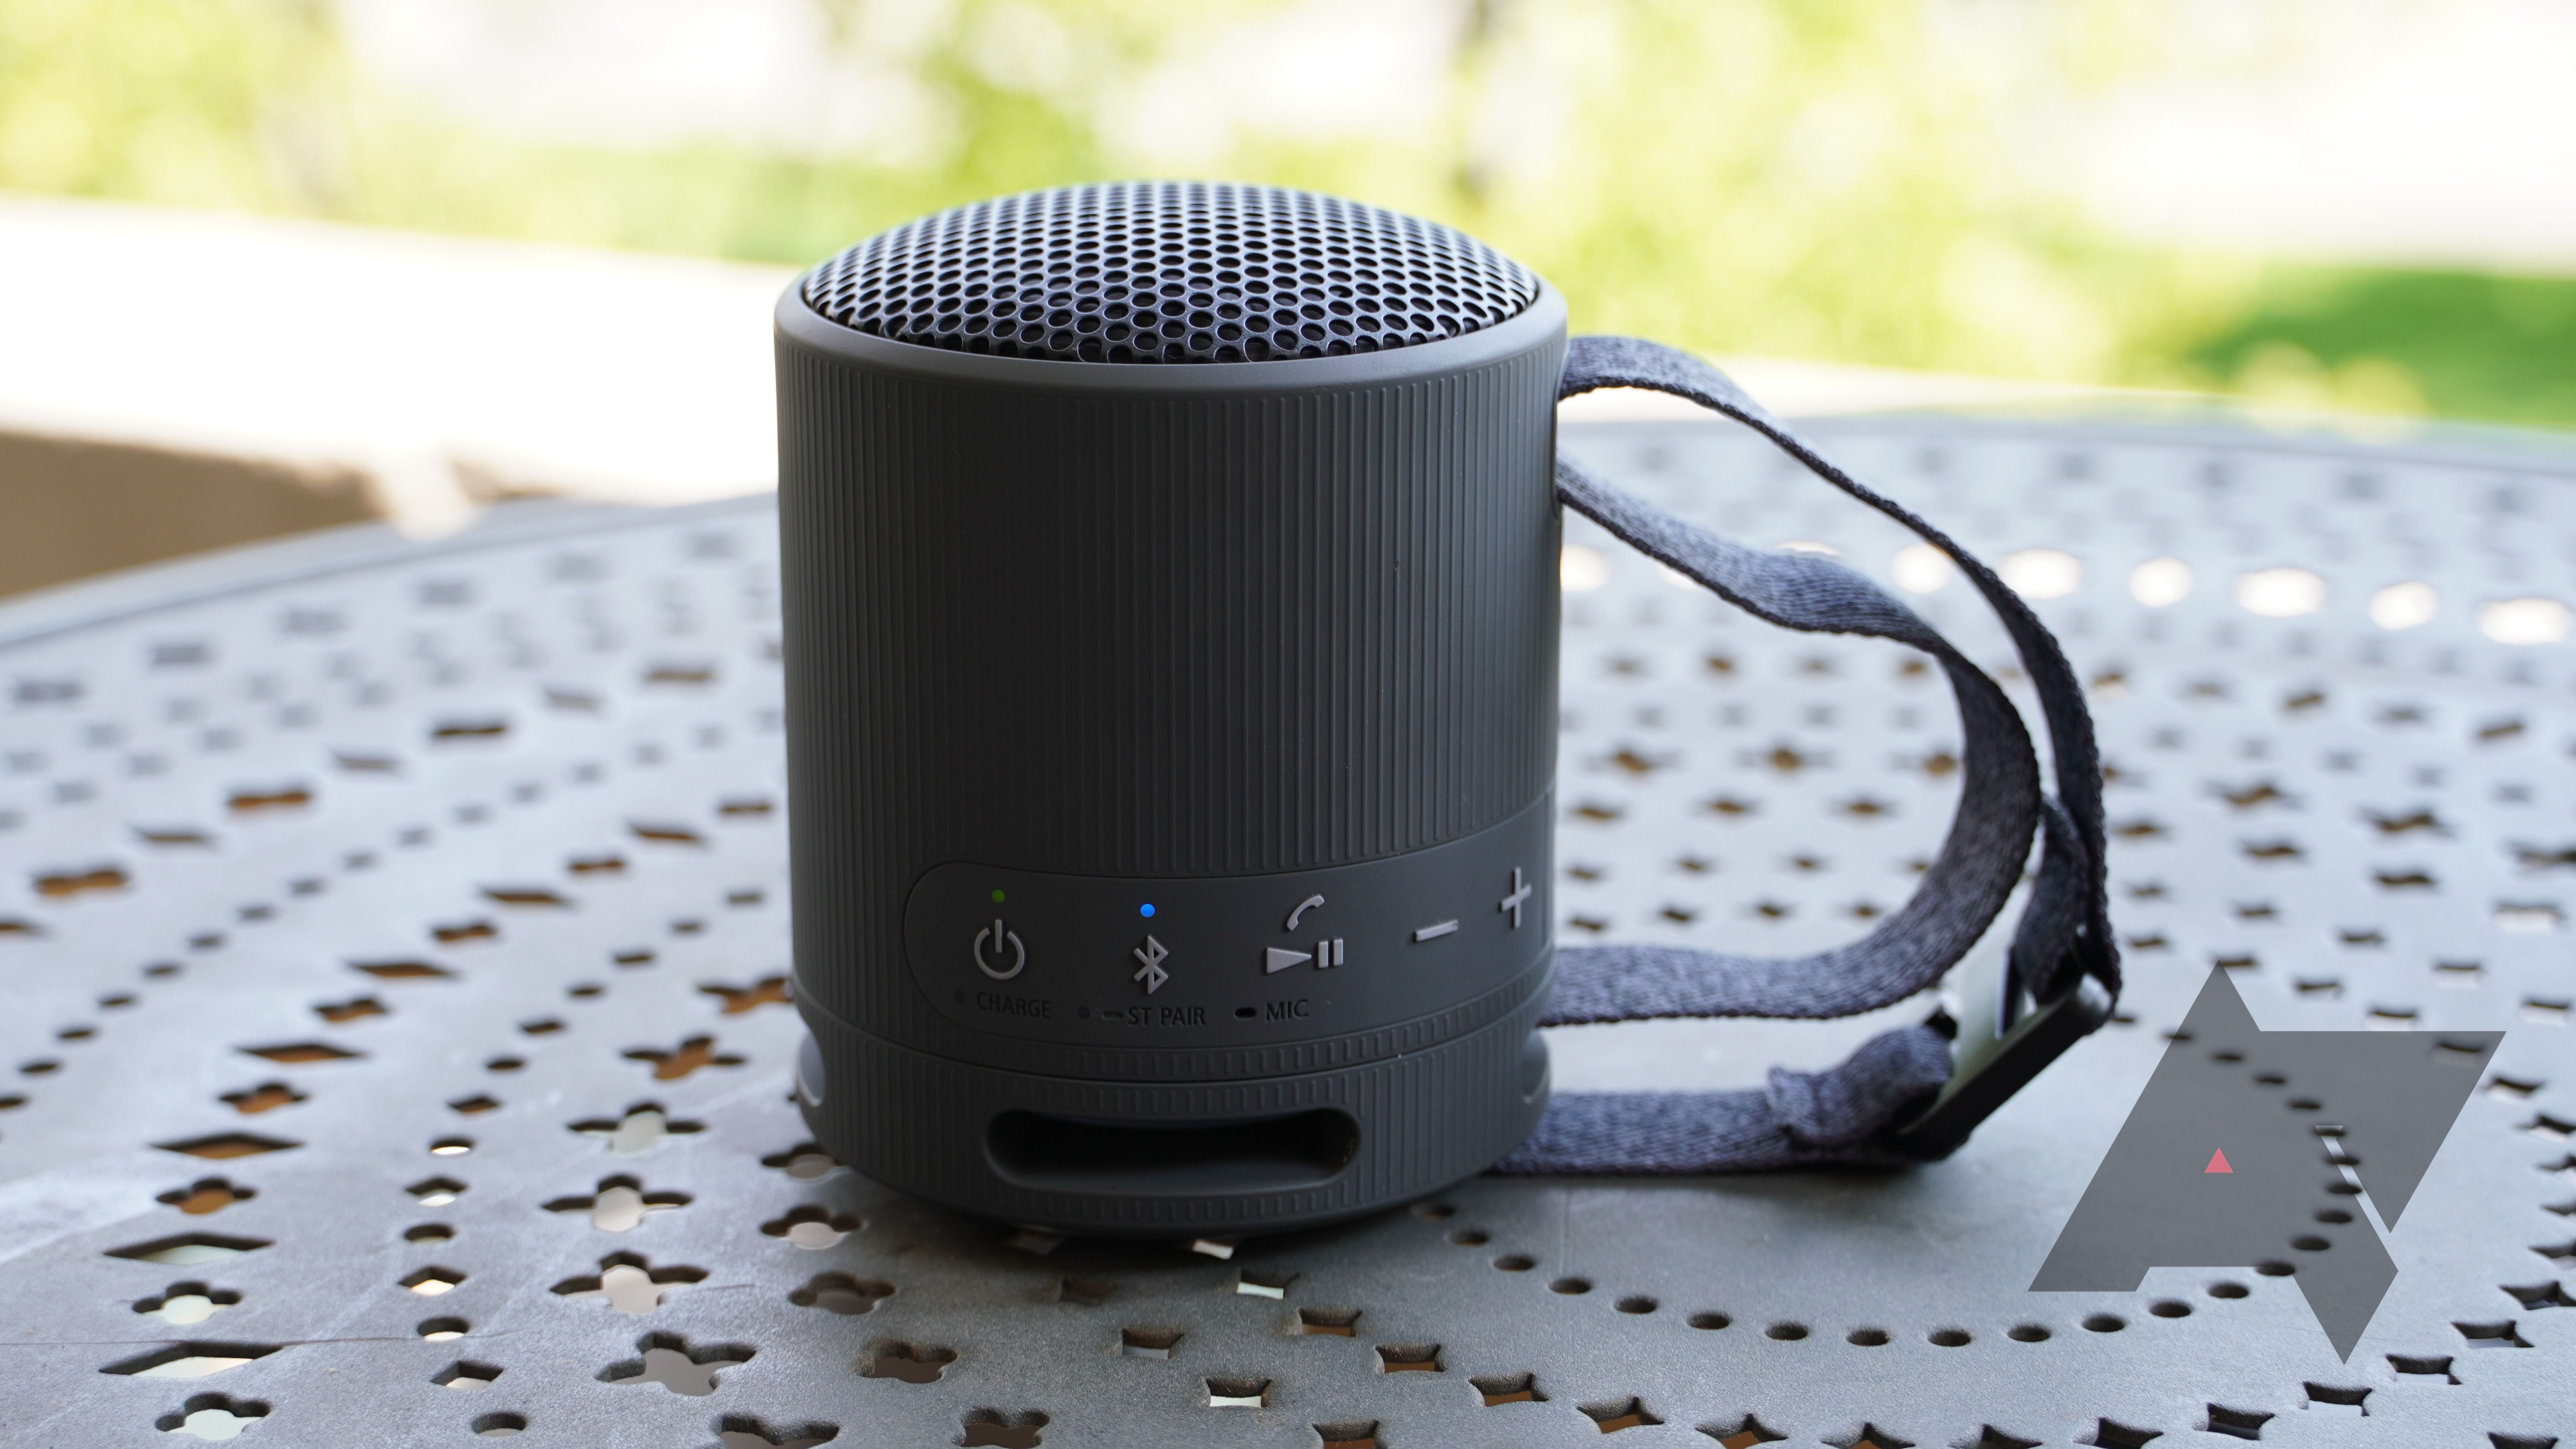 Sony SRS-XB100 Bluetooth speaker standing on a table